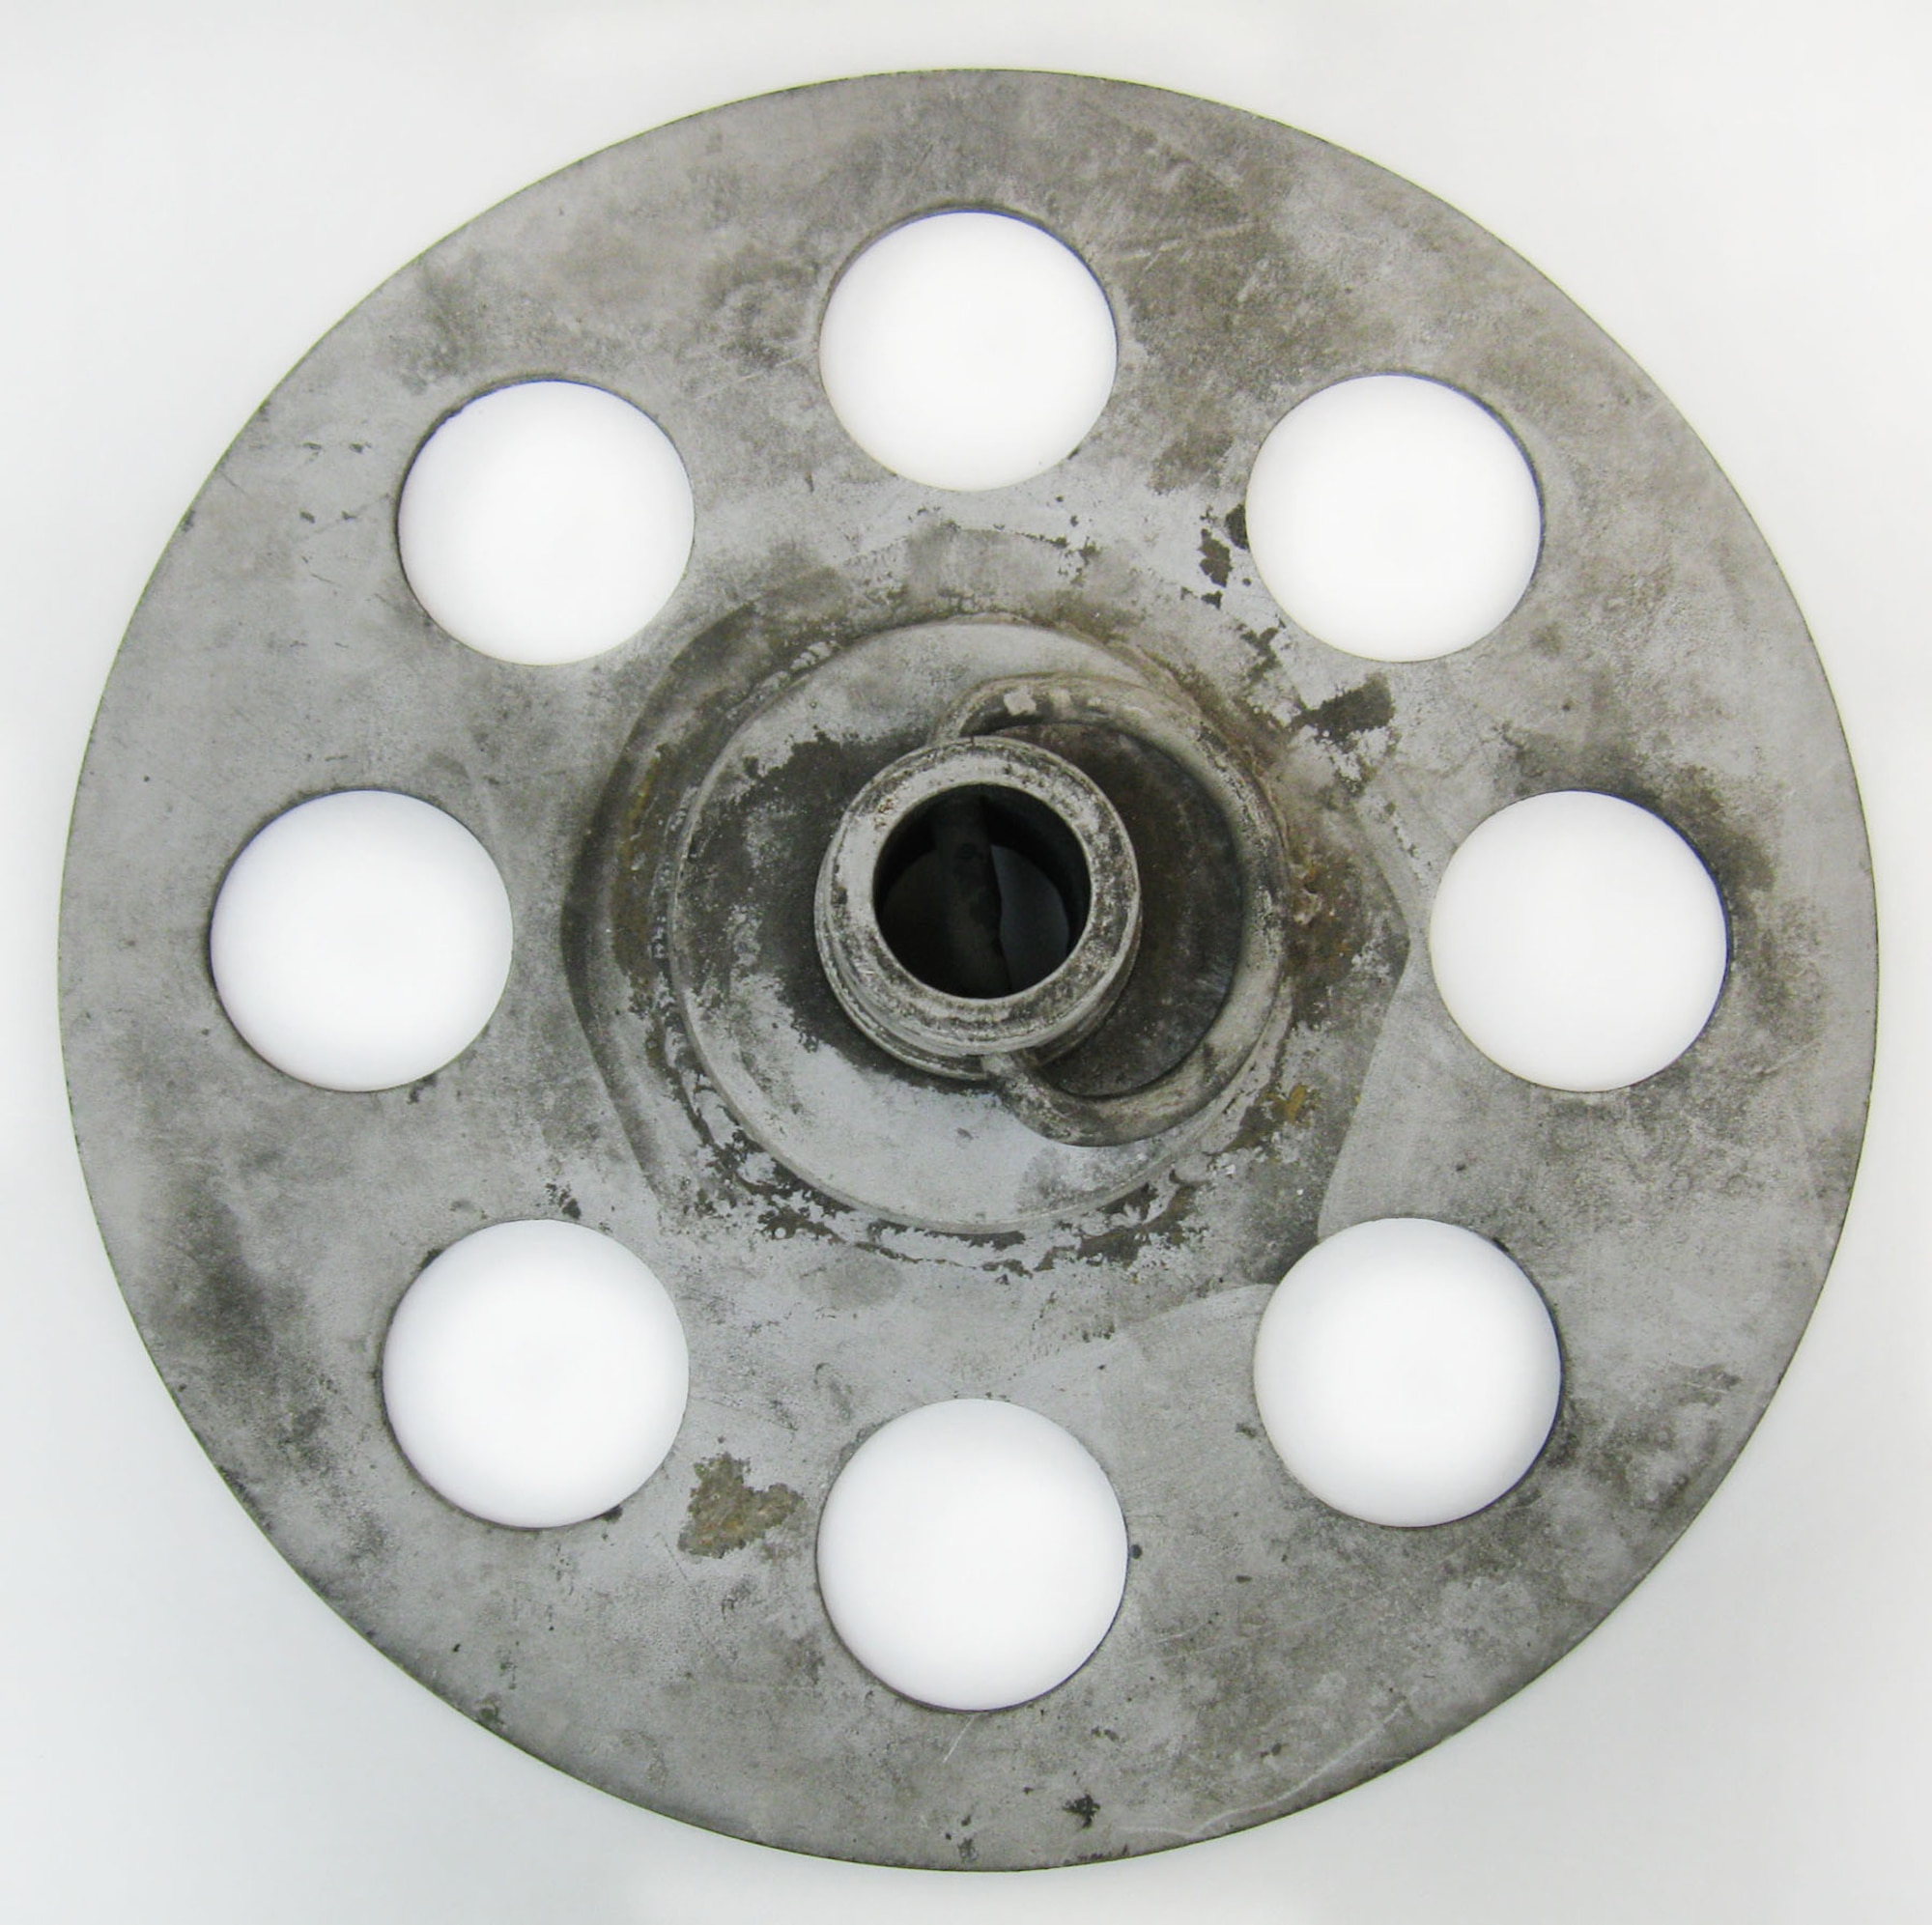 This item is a metal anchor plate that was developed to be the ground contact for an observation balloon attached to it by mooring lines. (U.S. Air Force photo)